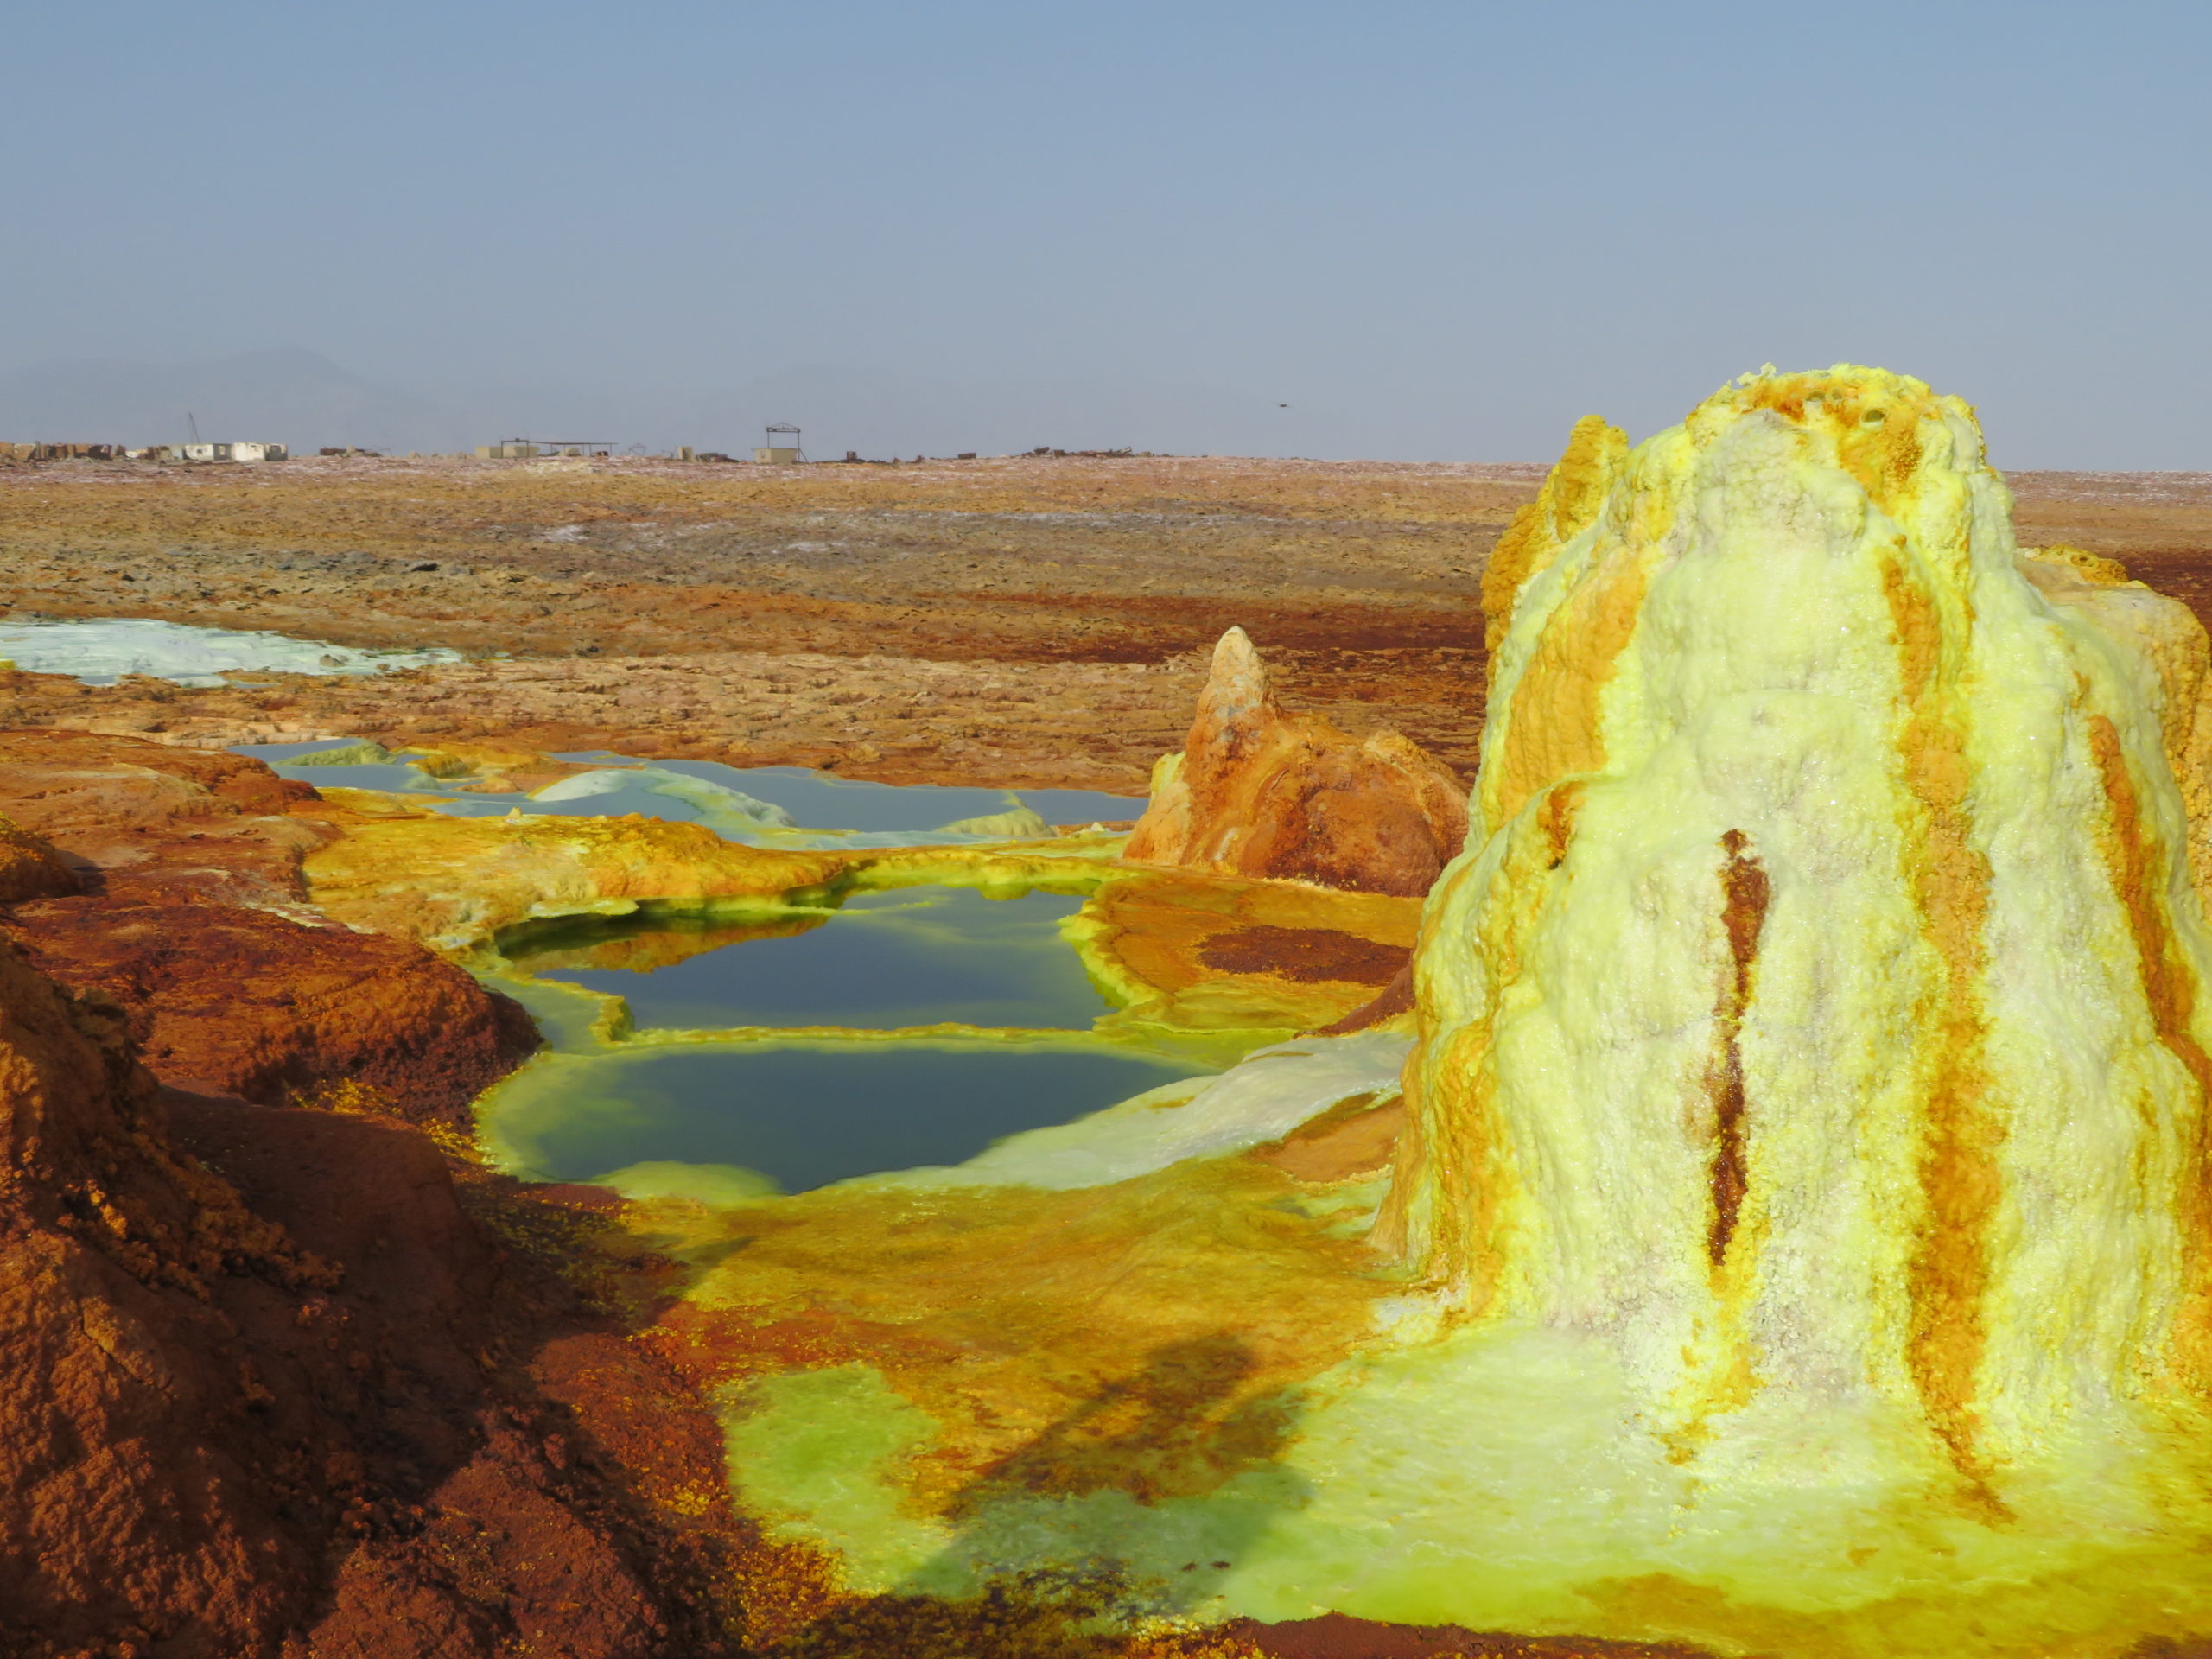 Danakil Depression- the most inhospitable place on earth, apparently.